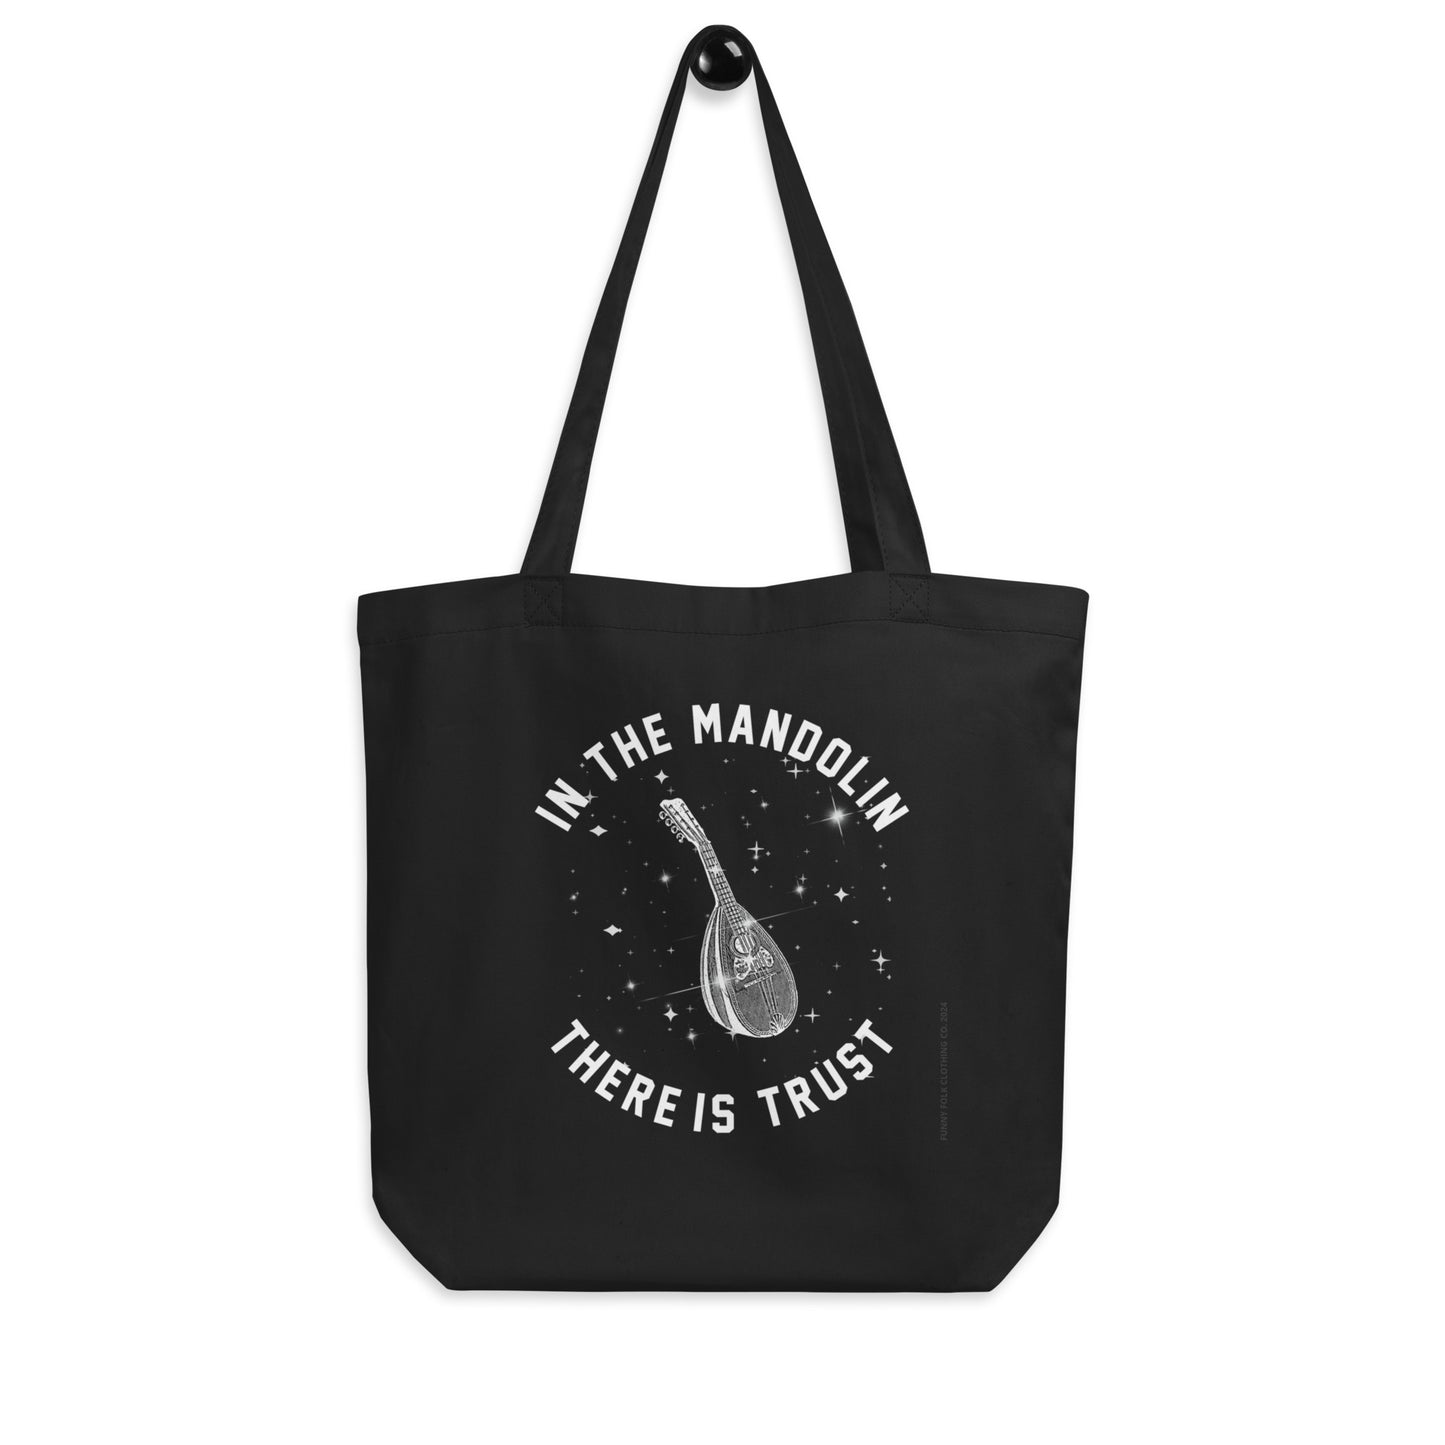 In The Mandolin There is Trust Tote